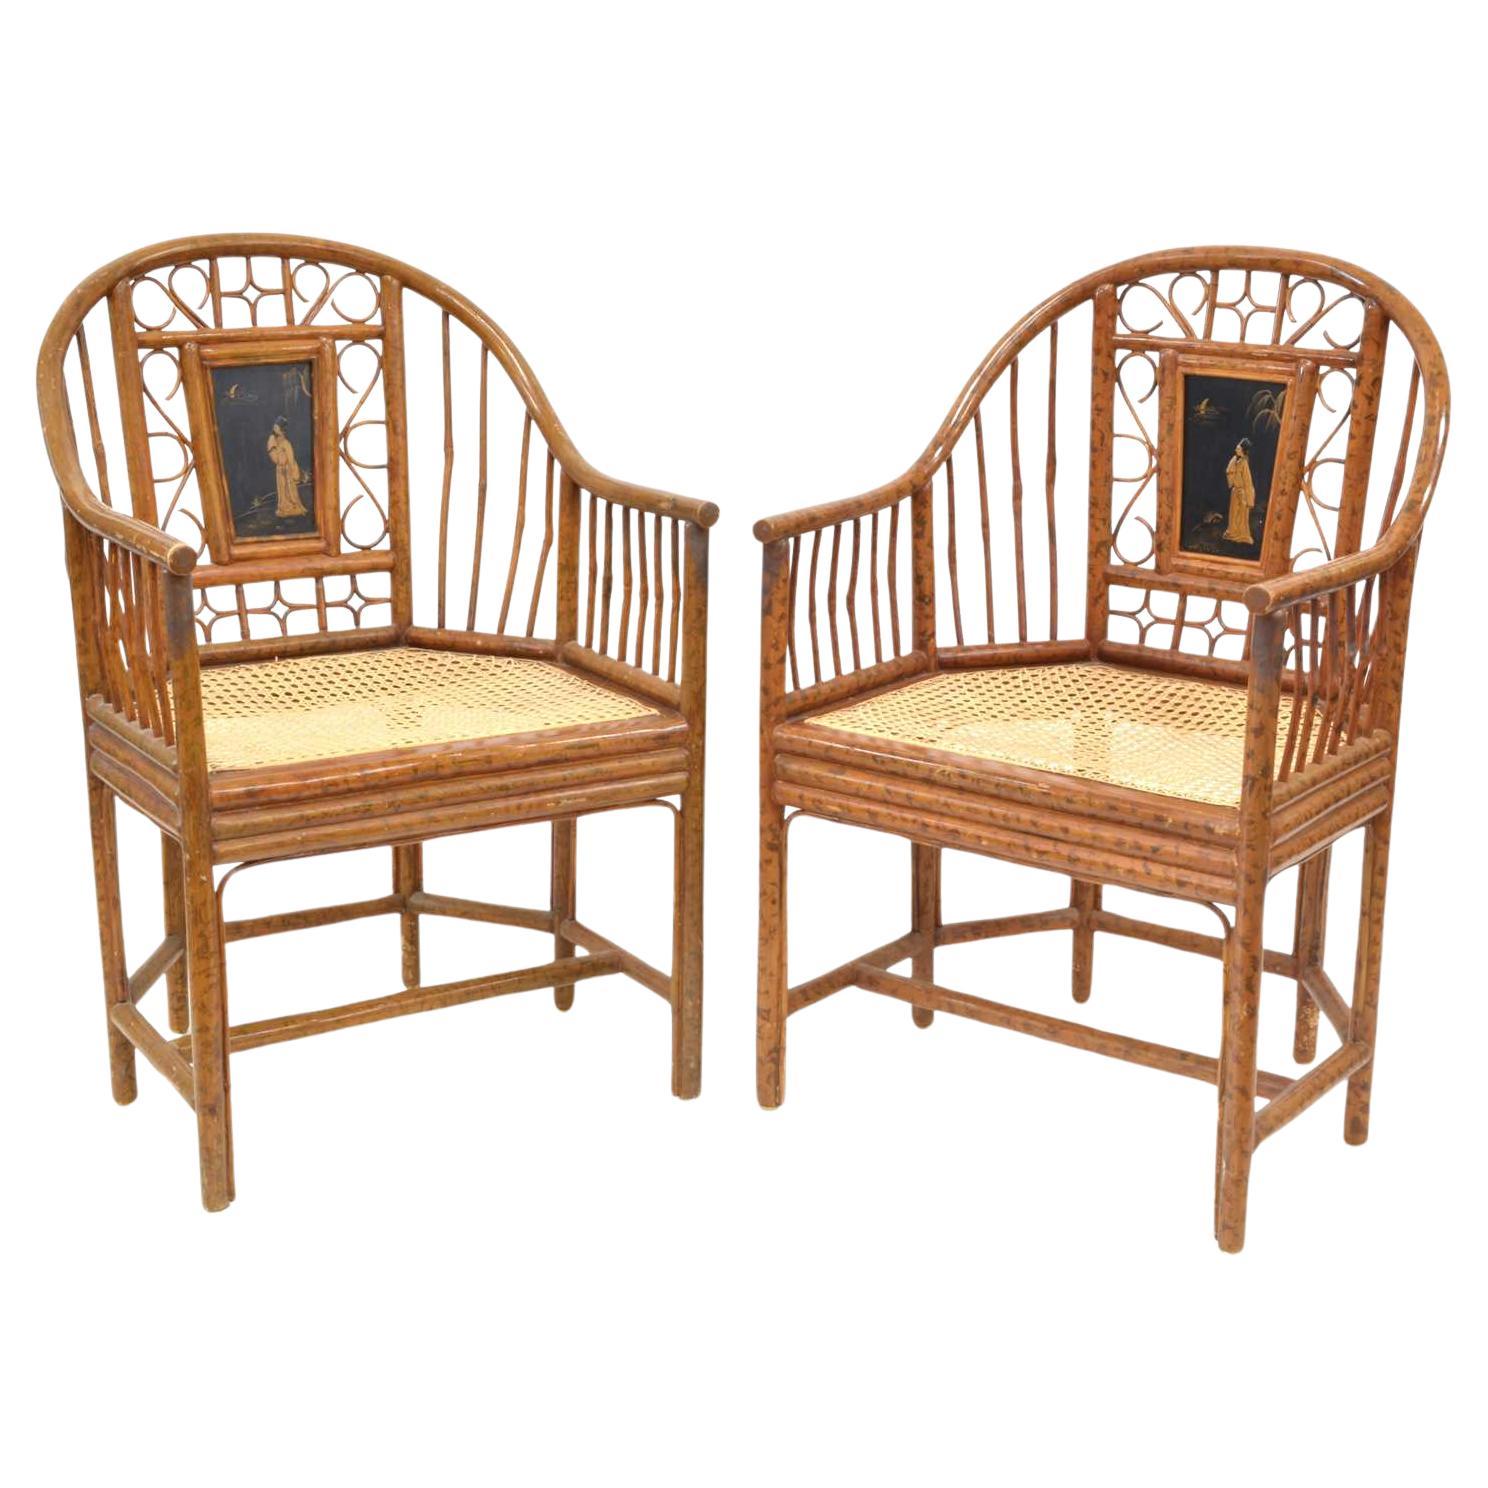 Pair of Faux Bamboo Brighton Pavilion Chairs For Sale